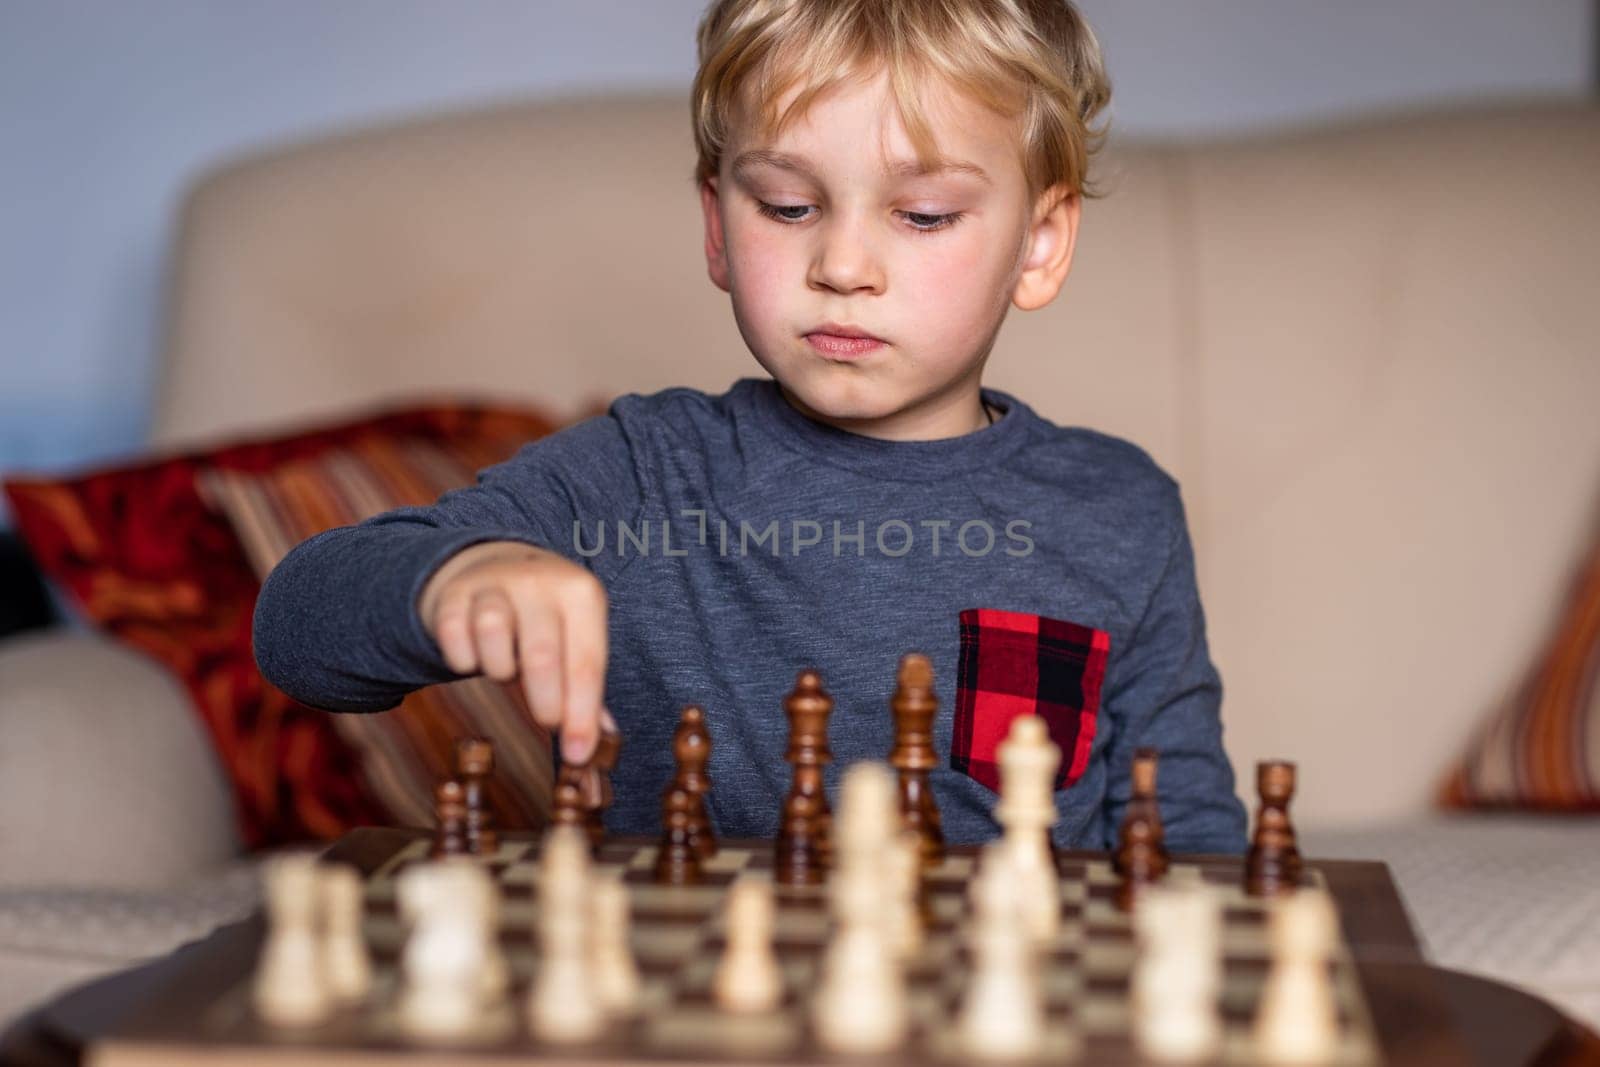 Small child 5 years old playing a game of chess on large chess board. Chess board on table in front of the boy thinking of next move by Len44ik